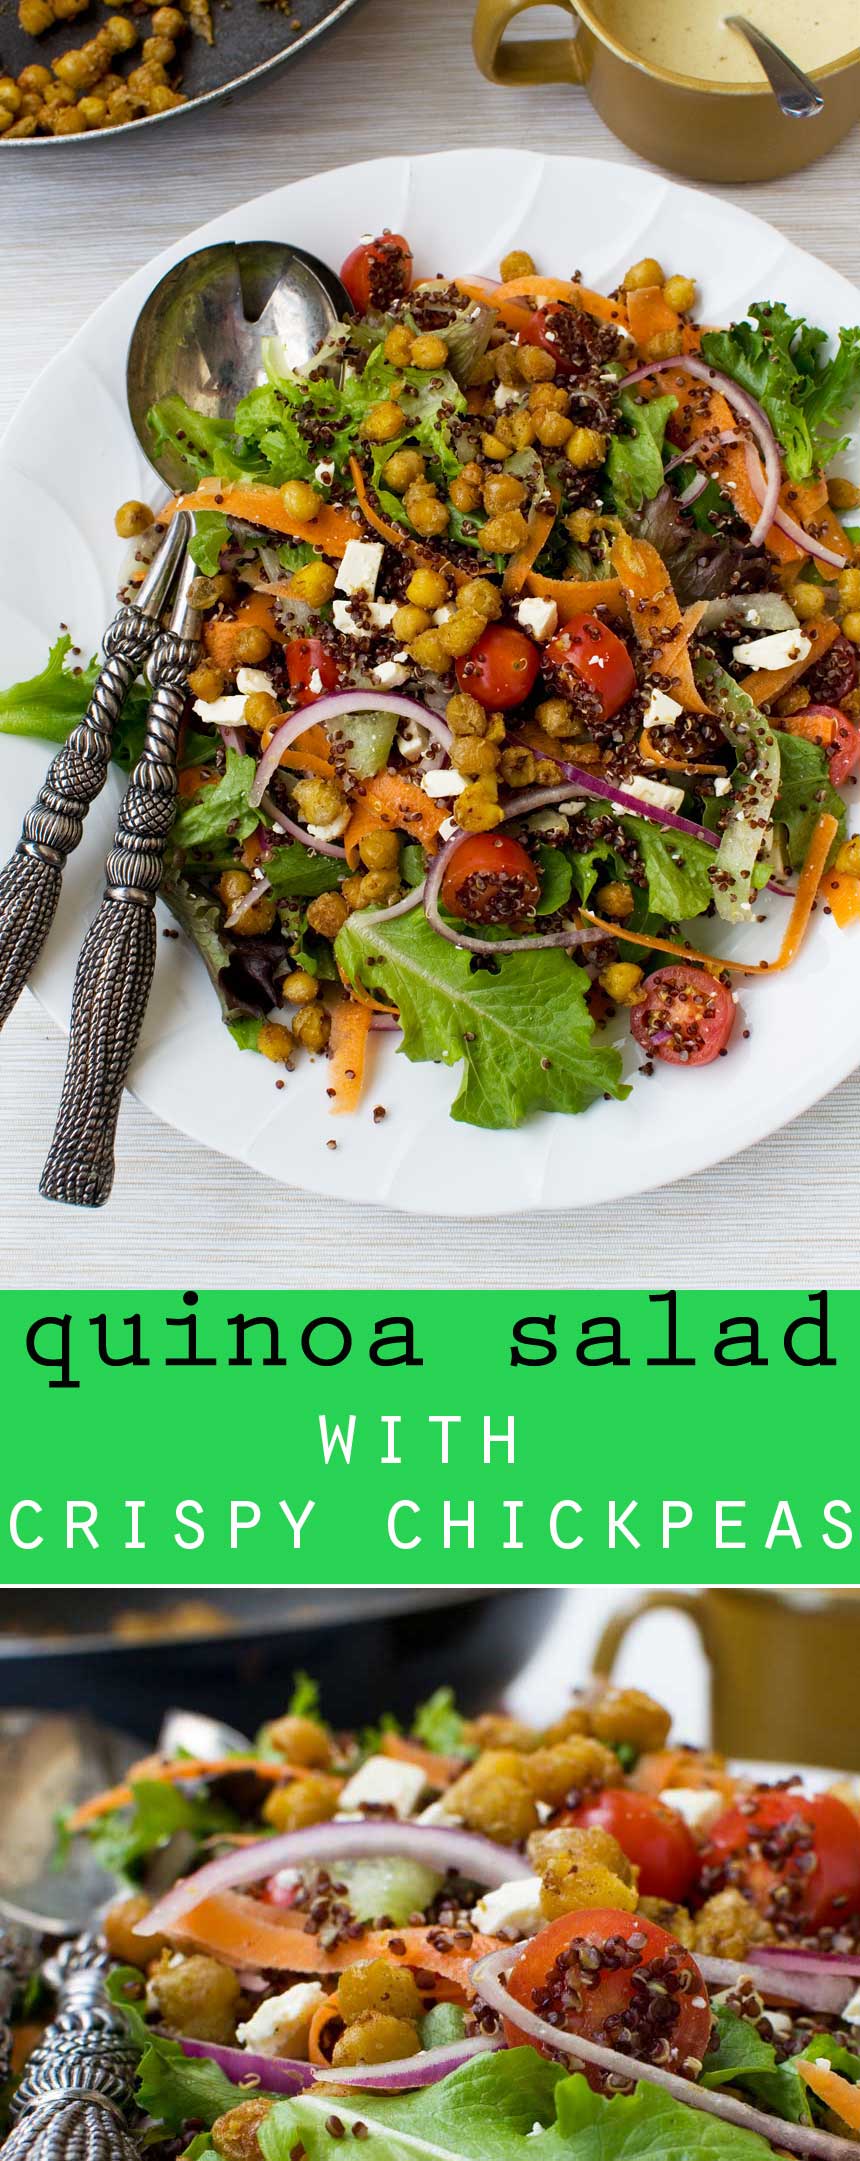 Quinoa salad with crispy chickpeas from above with salad servers and a title for Pinterest.